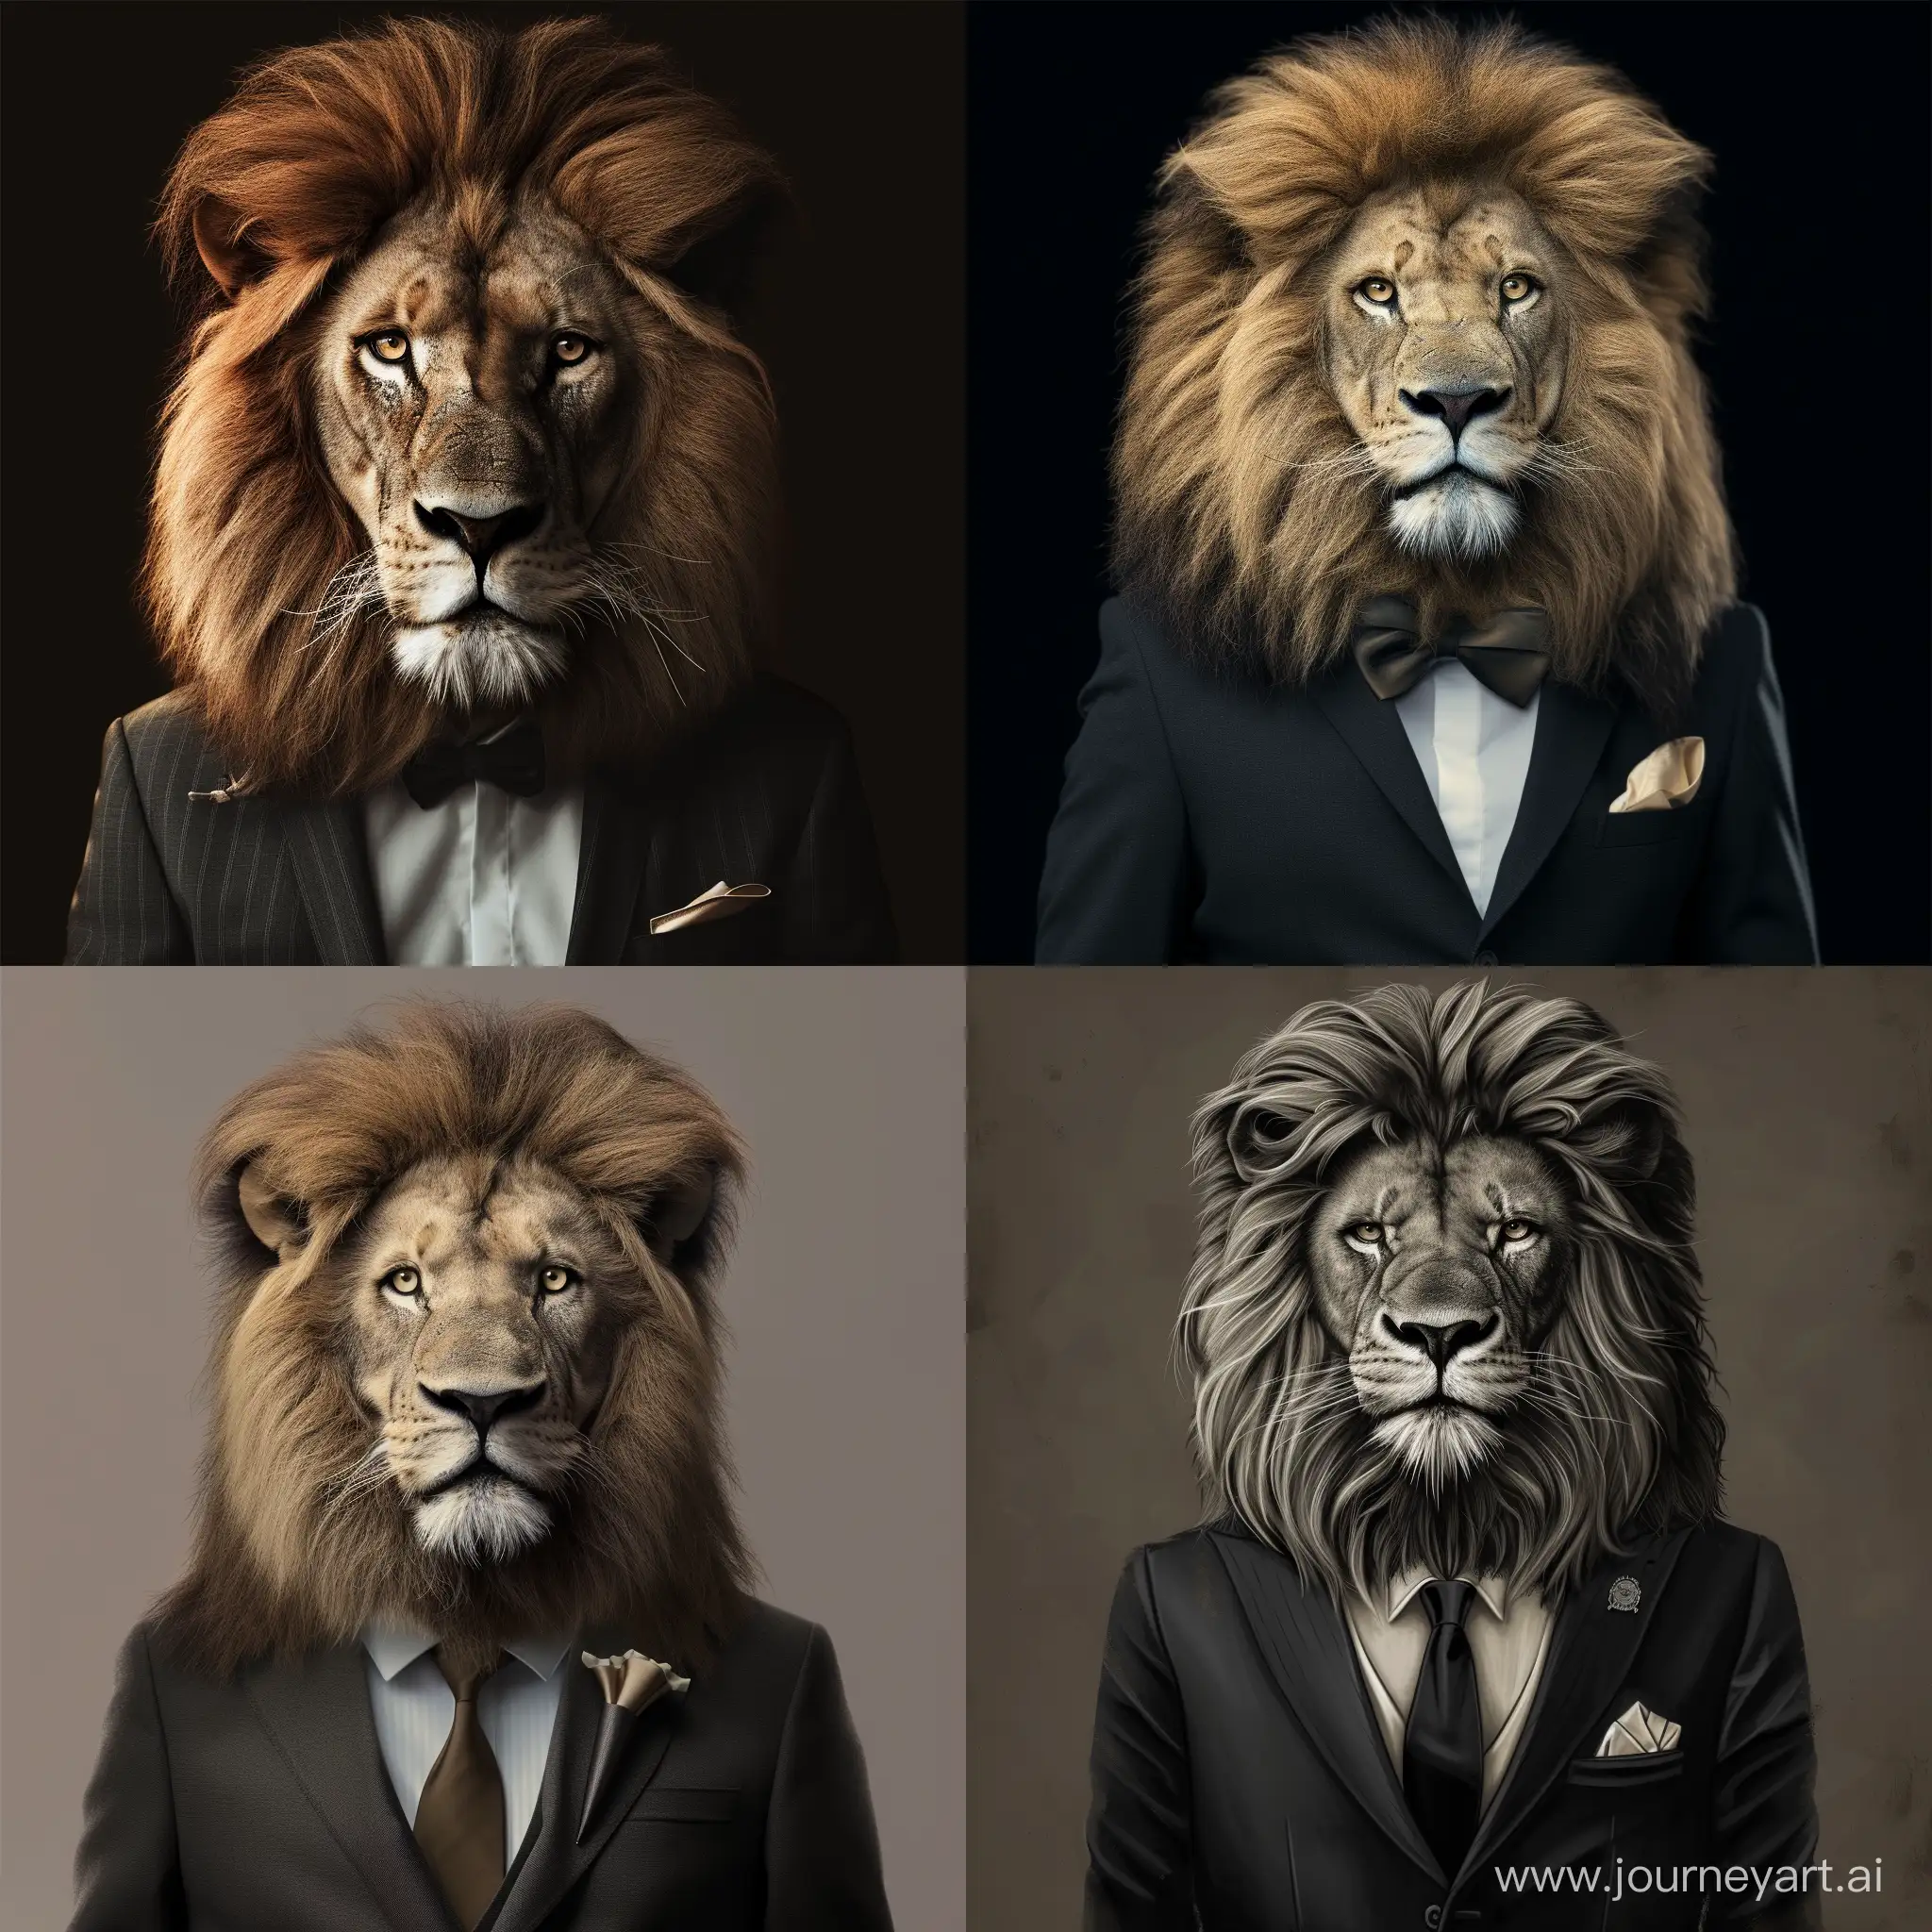 Elegant-Lions-in-Sophisticated-Suits